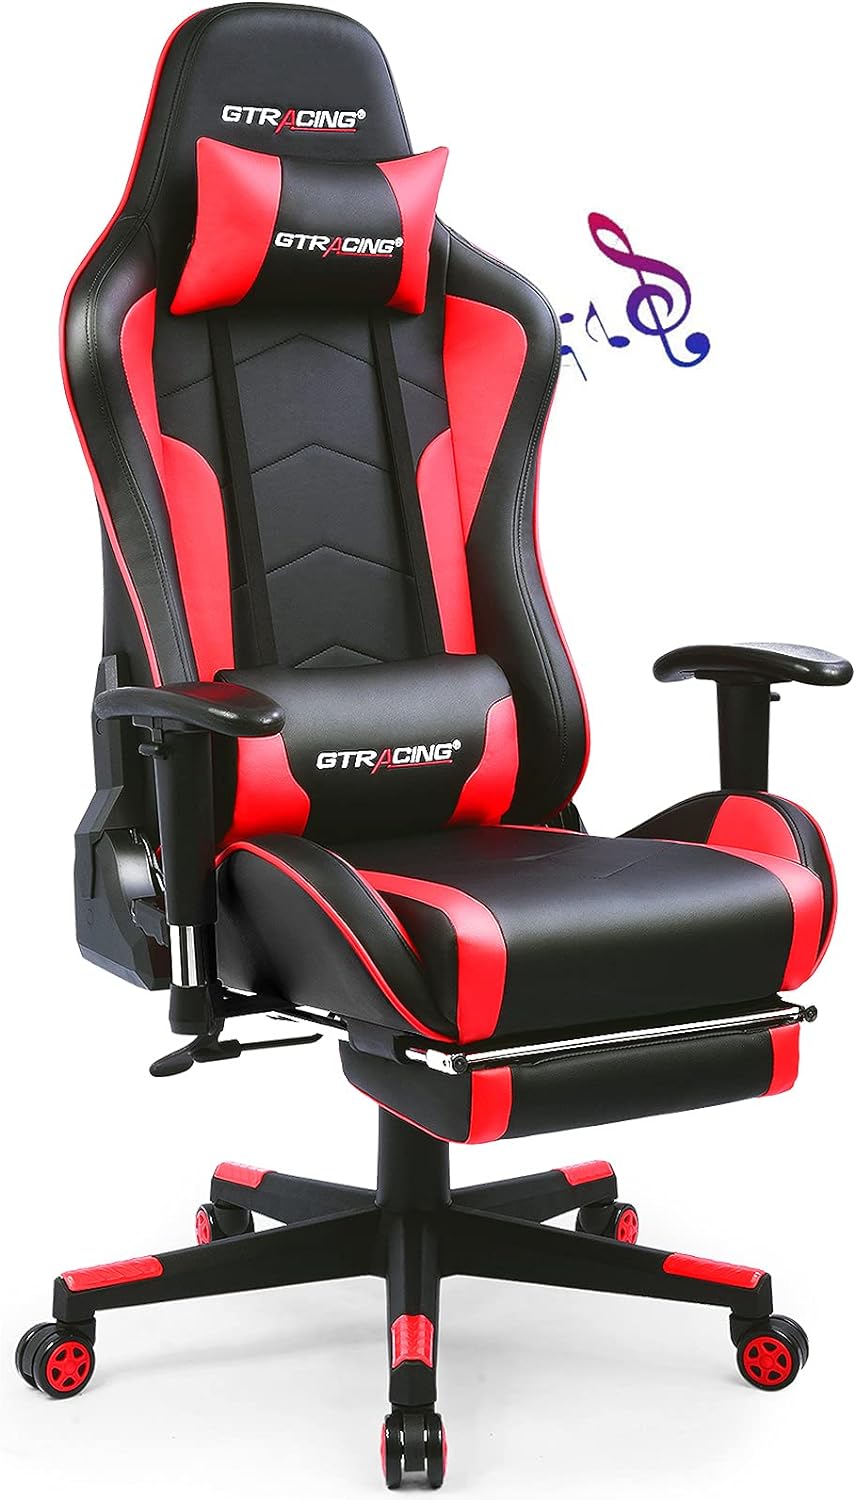 GTRACING Gaming Chair with Bluetooth Speaker is the best-selling gaming chair from GTRACING. This chair is very comfortable and durable.